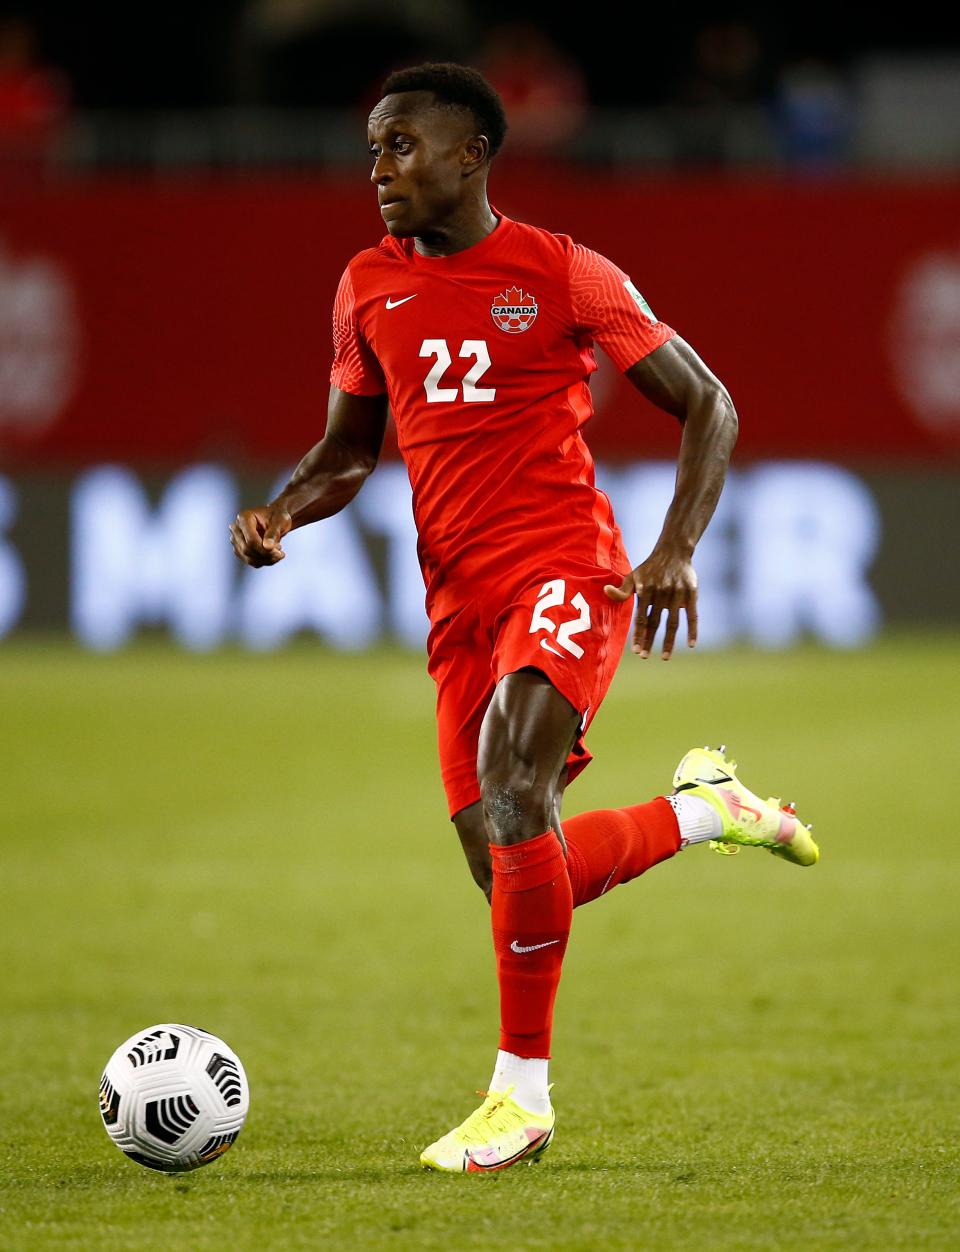 TORONTO, ON - SEPTEMBER 02:  Richie Laryea #22 of Canada dribbles the ball during a 2022 World Cup Qualifying match against Honduras at BMO Field on September 2, 2021 in Toronto, Ontario, Canada.  (Photo by Vaughn Ridley/Getty Images)